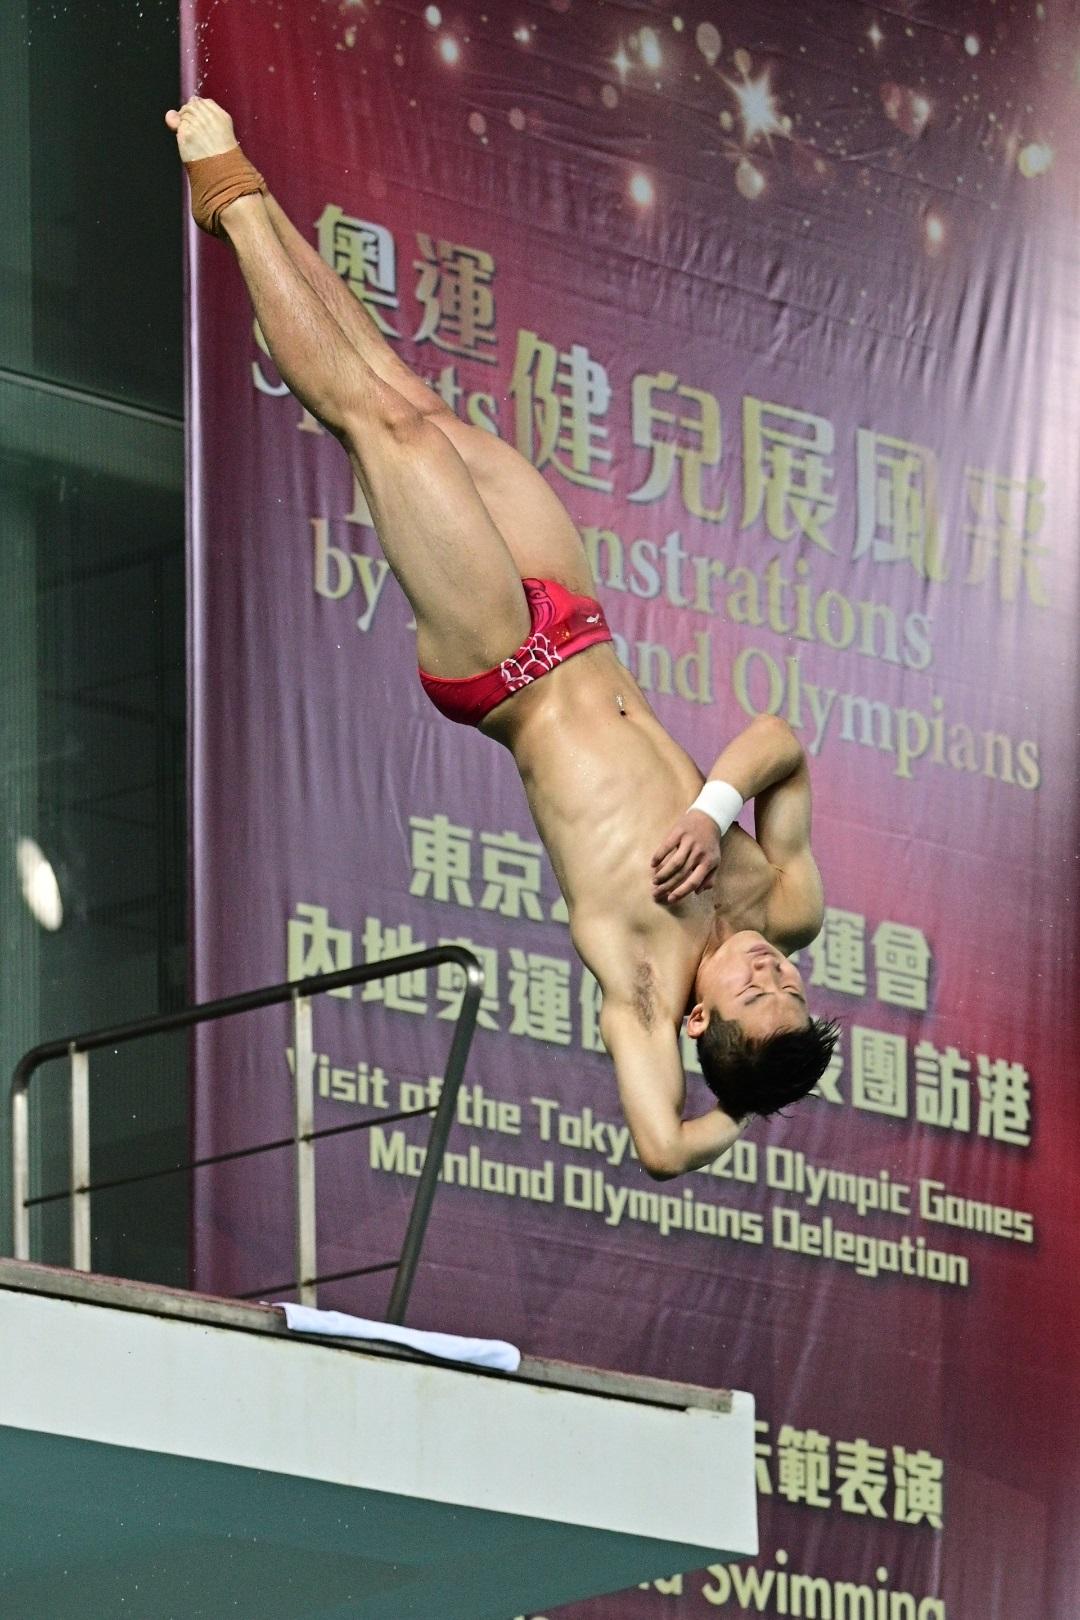 The delegation of Tokyo 2020 Olympic Games Mainland Olympians attended the sports demonstrations at Victoria Park Swimming Pool this morning (December 4). Photo shows Mainland diving athlete Wang Zongyuan performing a spectacular dive.